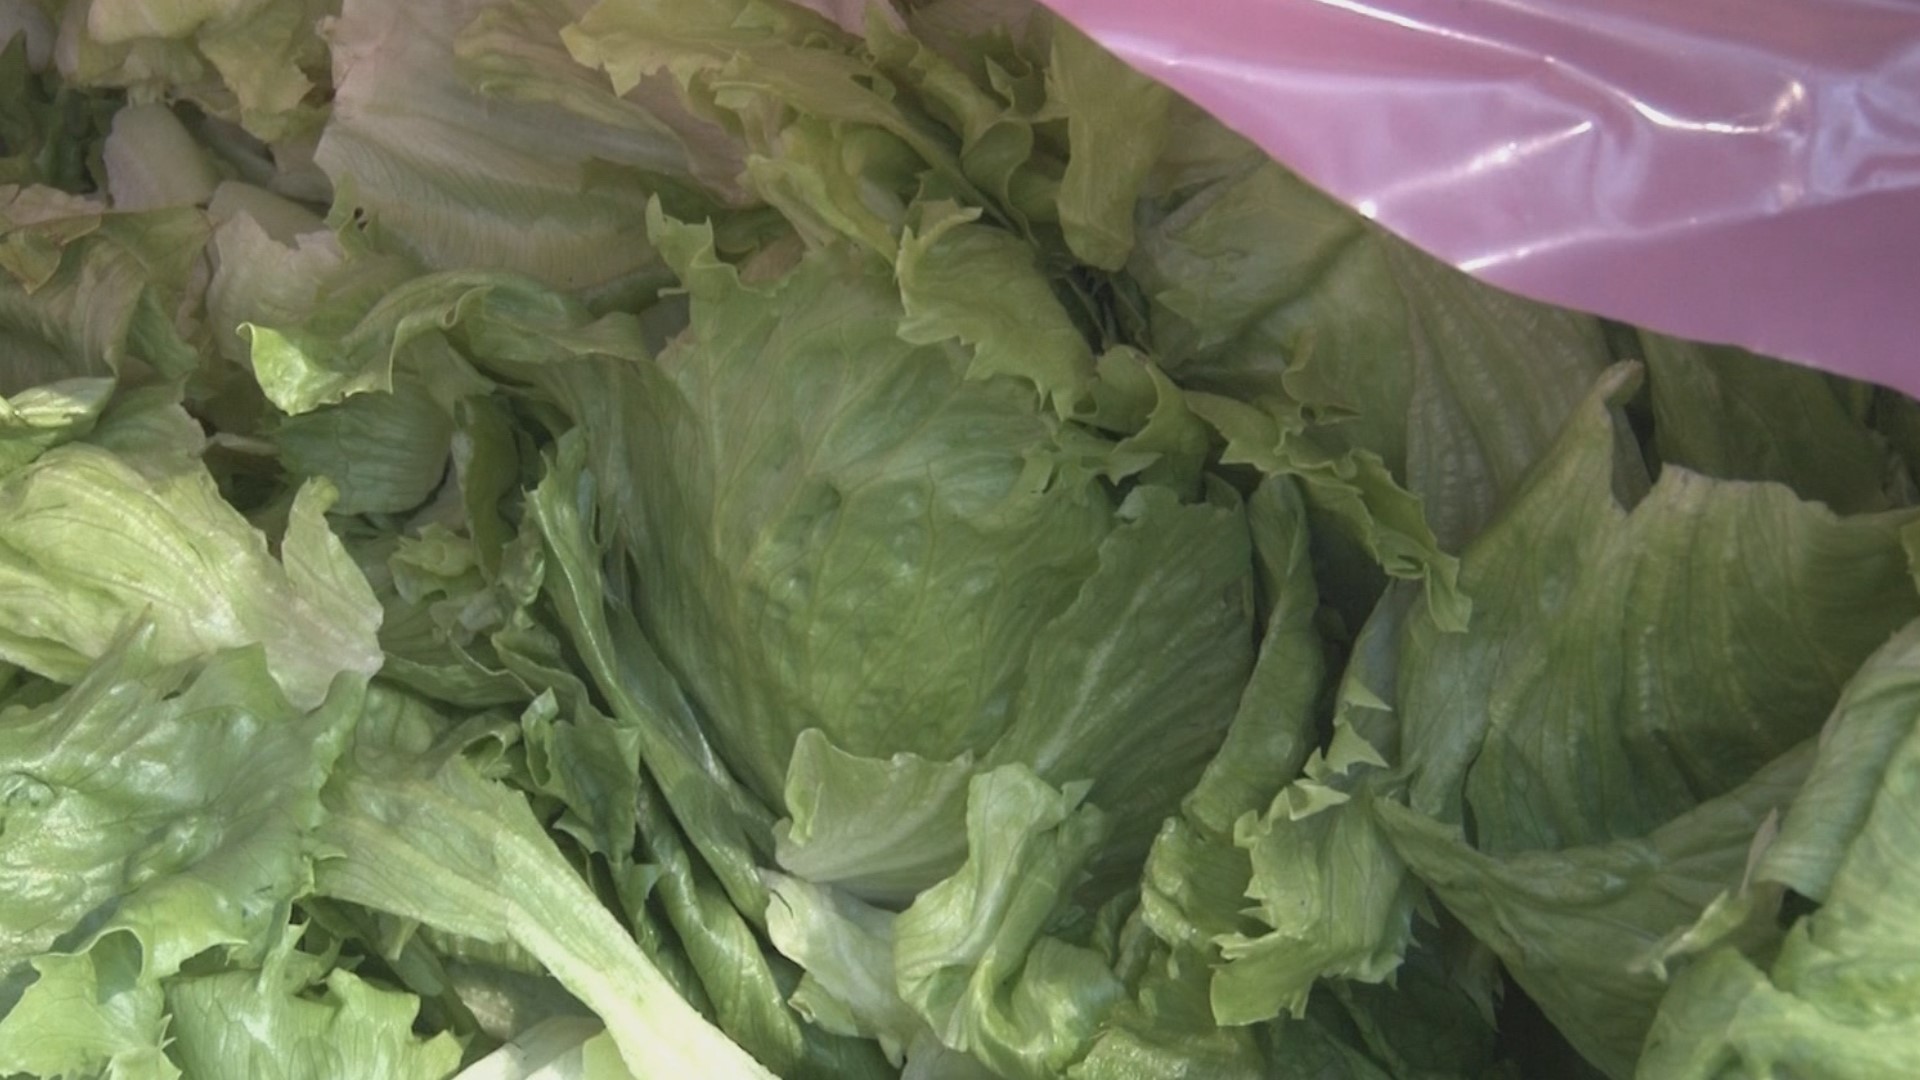 After a truck full of lettuce was sent away from its destination, some quick-thinking drivers found a way to give it away for free.